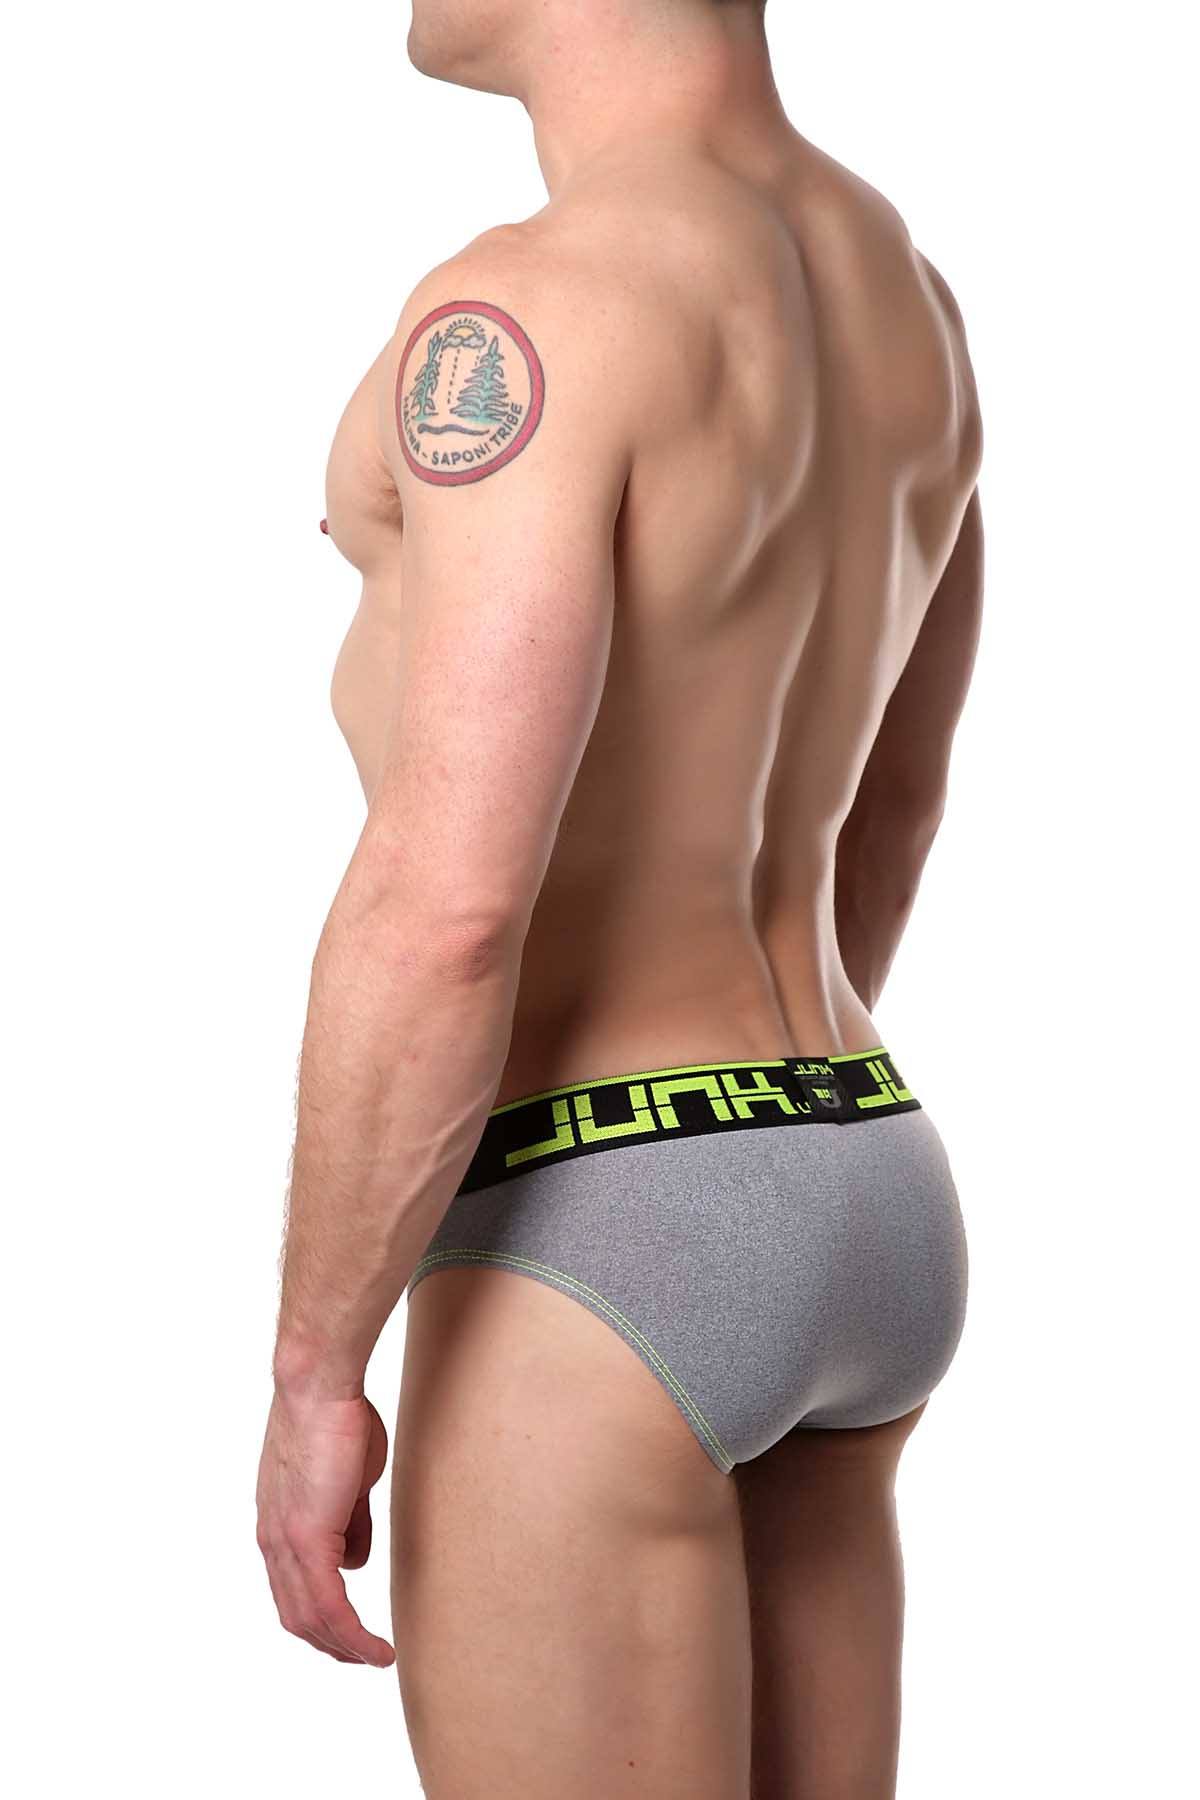 Junk Underjeans Yellow Rival Brief